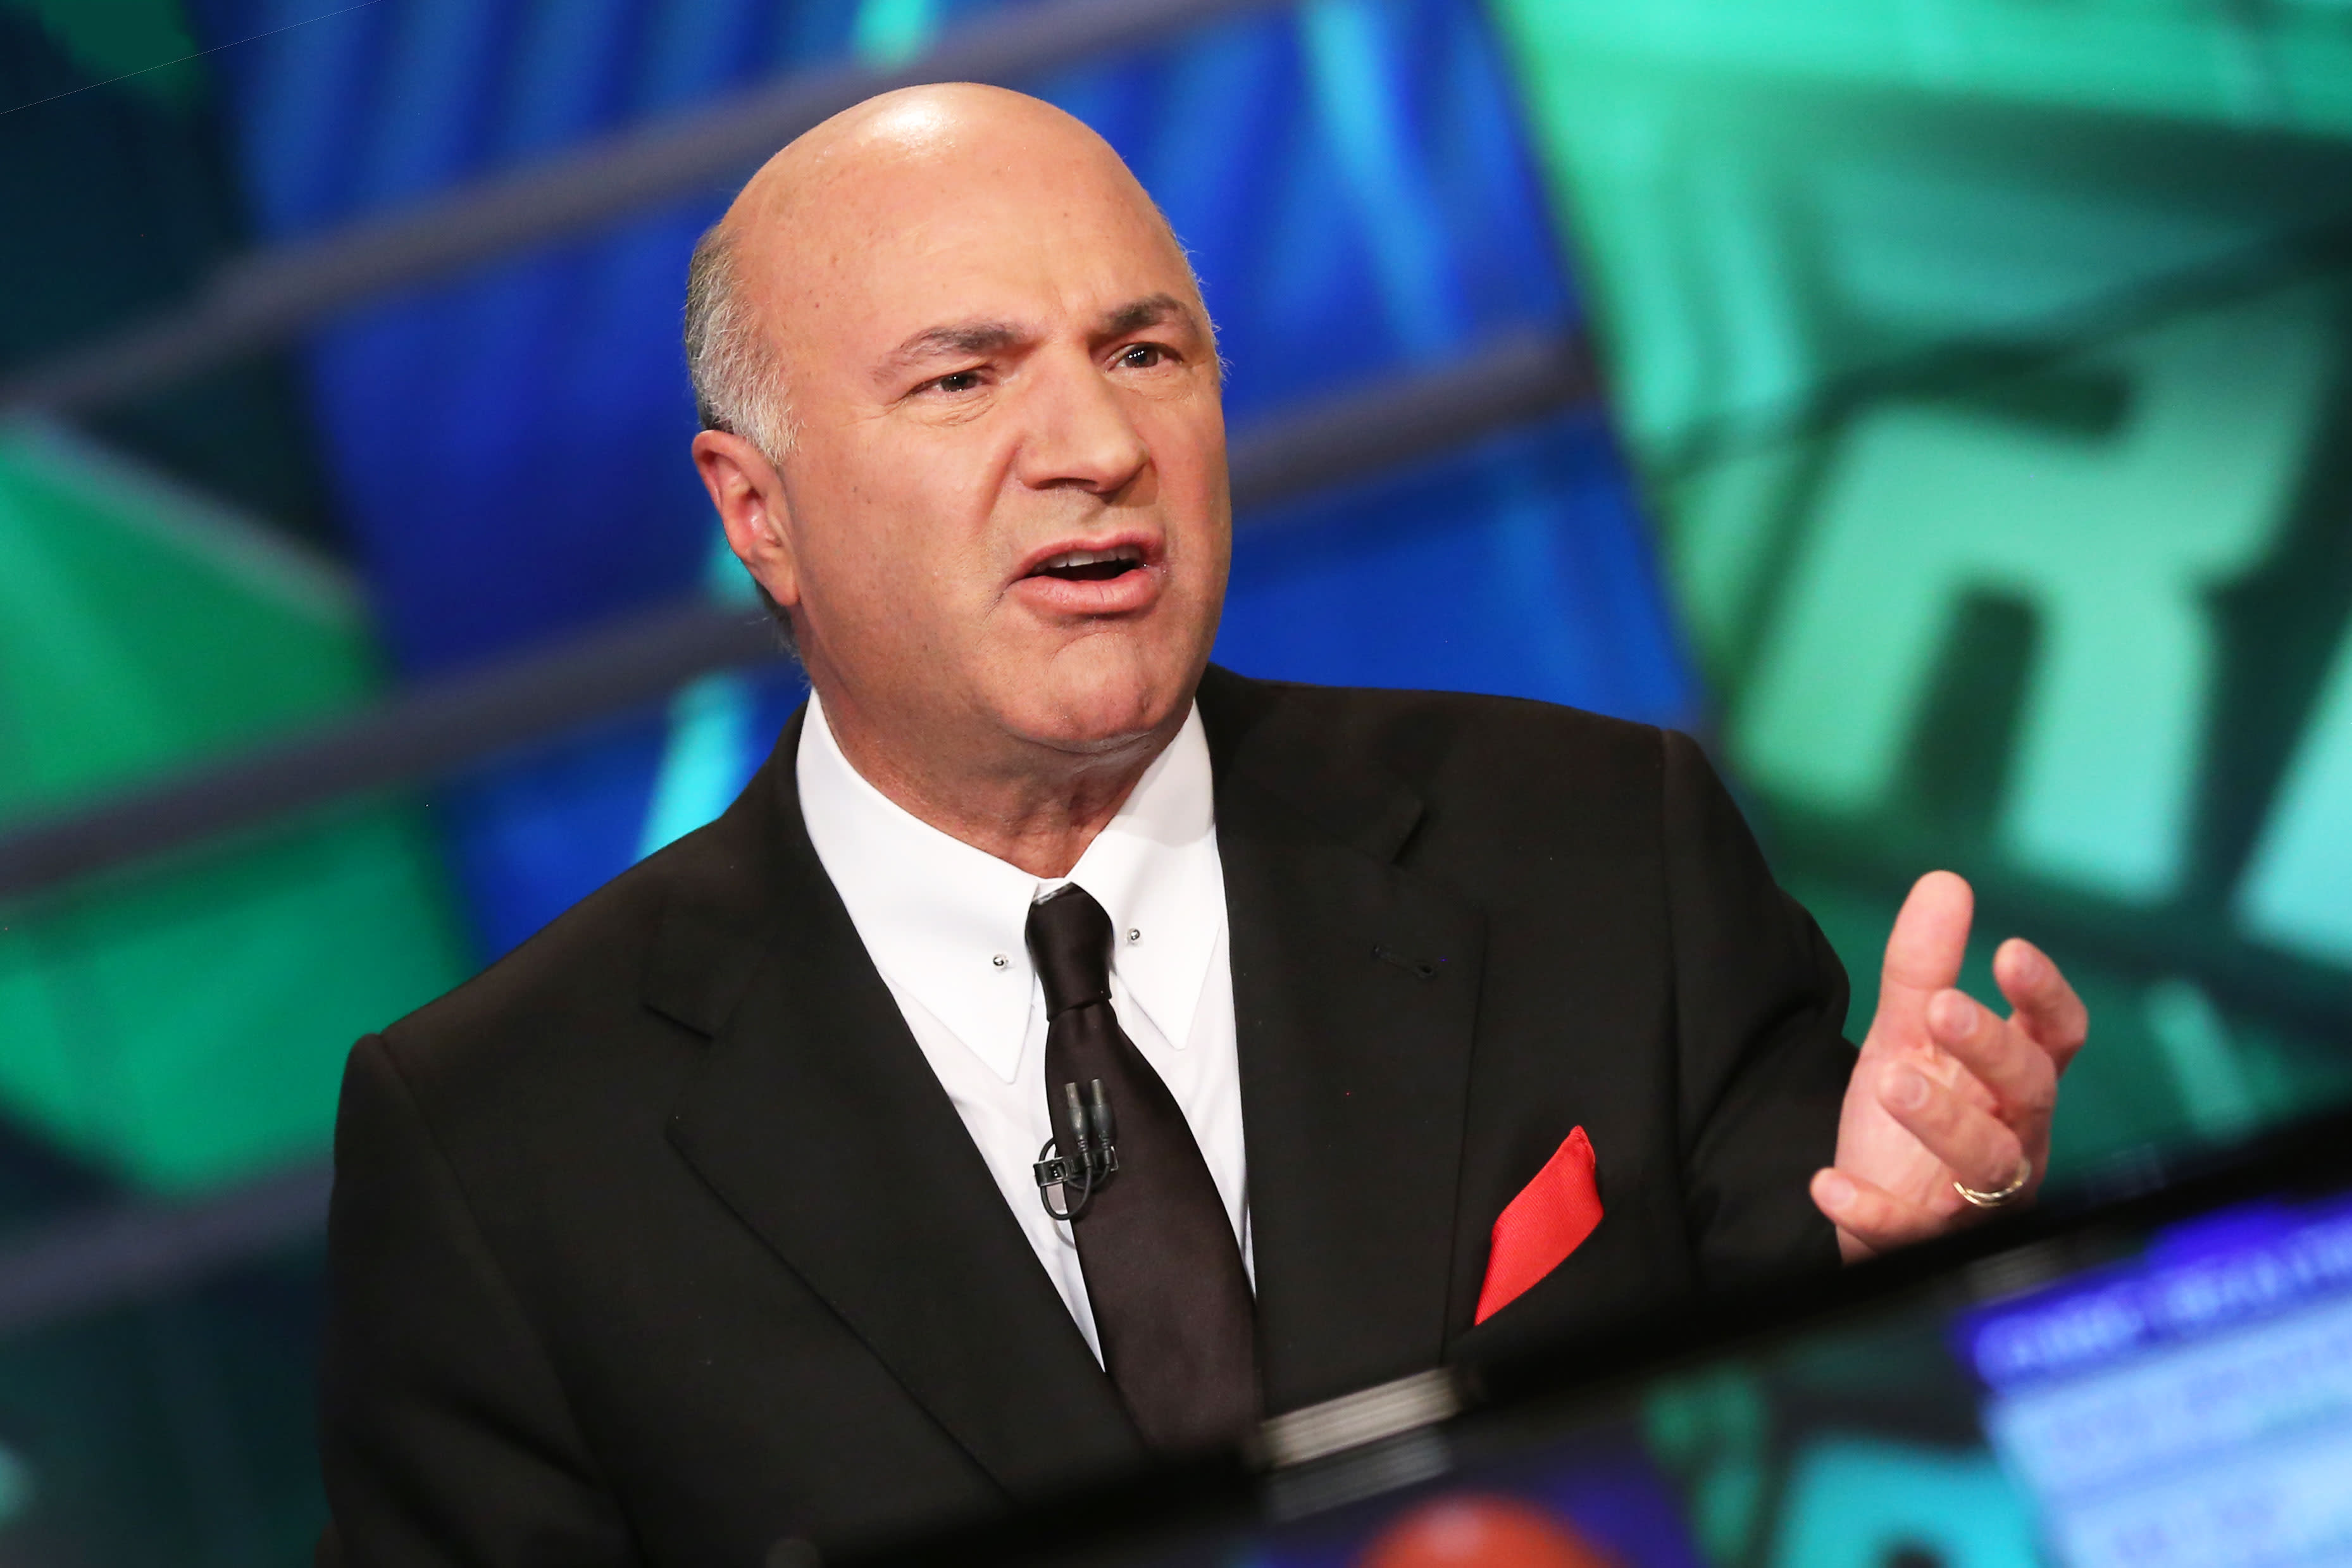 Kevin O’Leary says the US should match the playing field with China